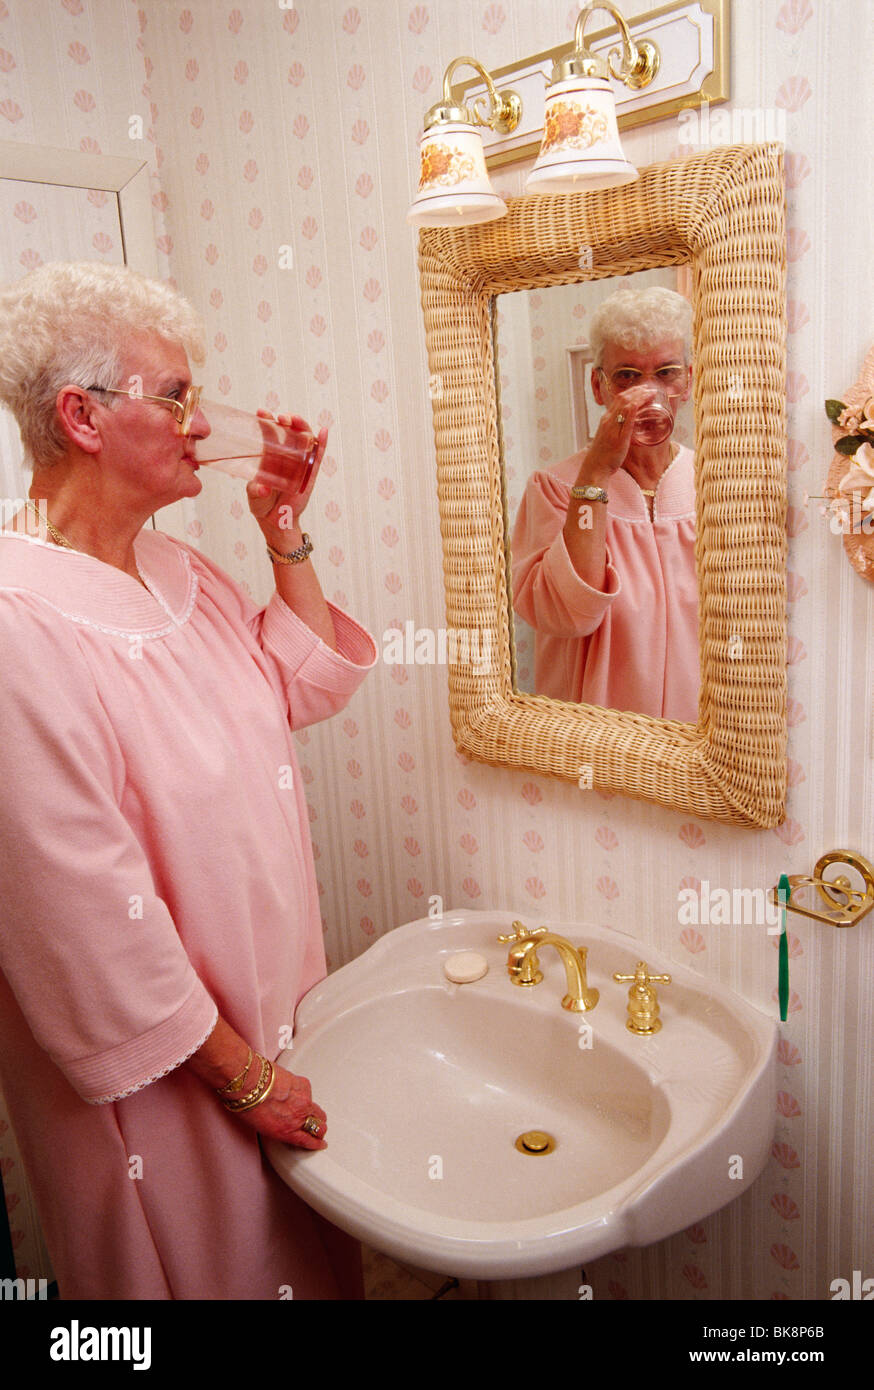 Elderly woman in her bathrobe drinking fresh water from a glass in her bathroom. Stock Photo